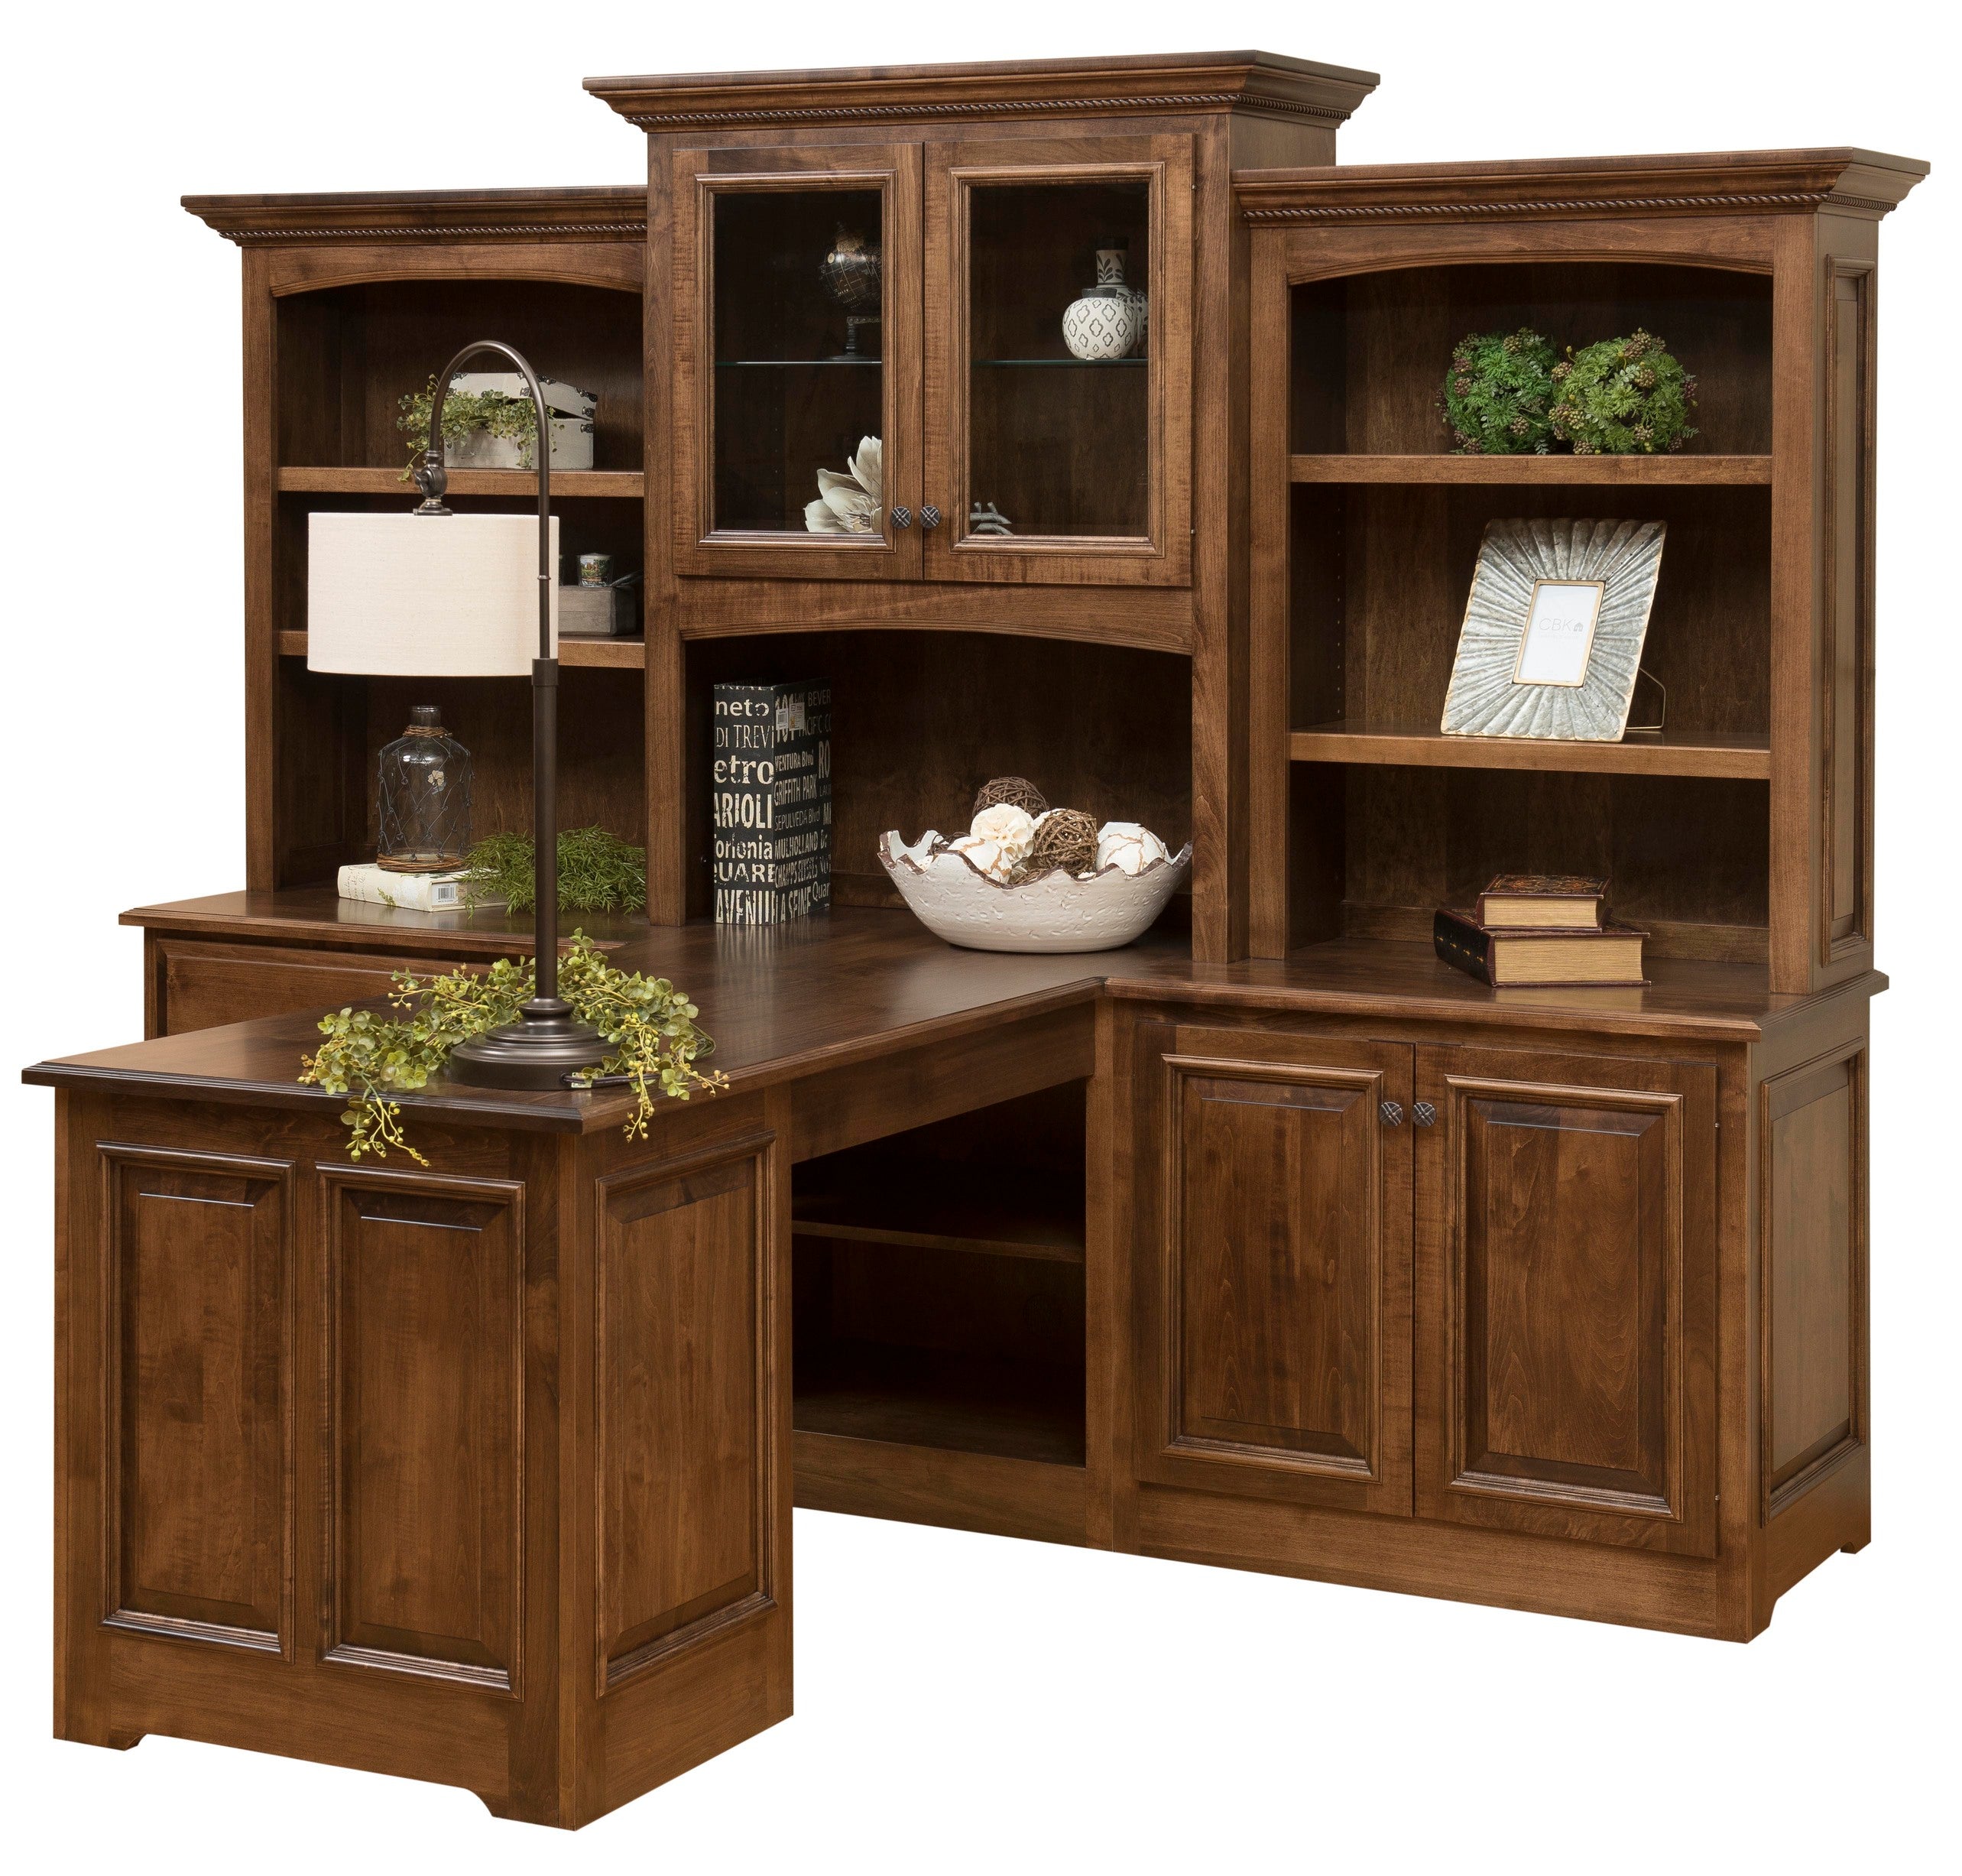 Amish Liberty Partners Desk and Three Piece Hutch